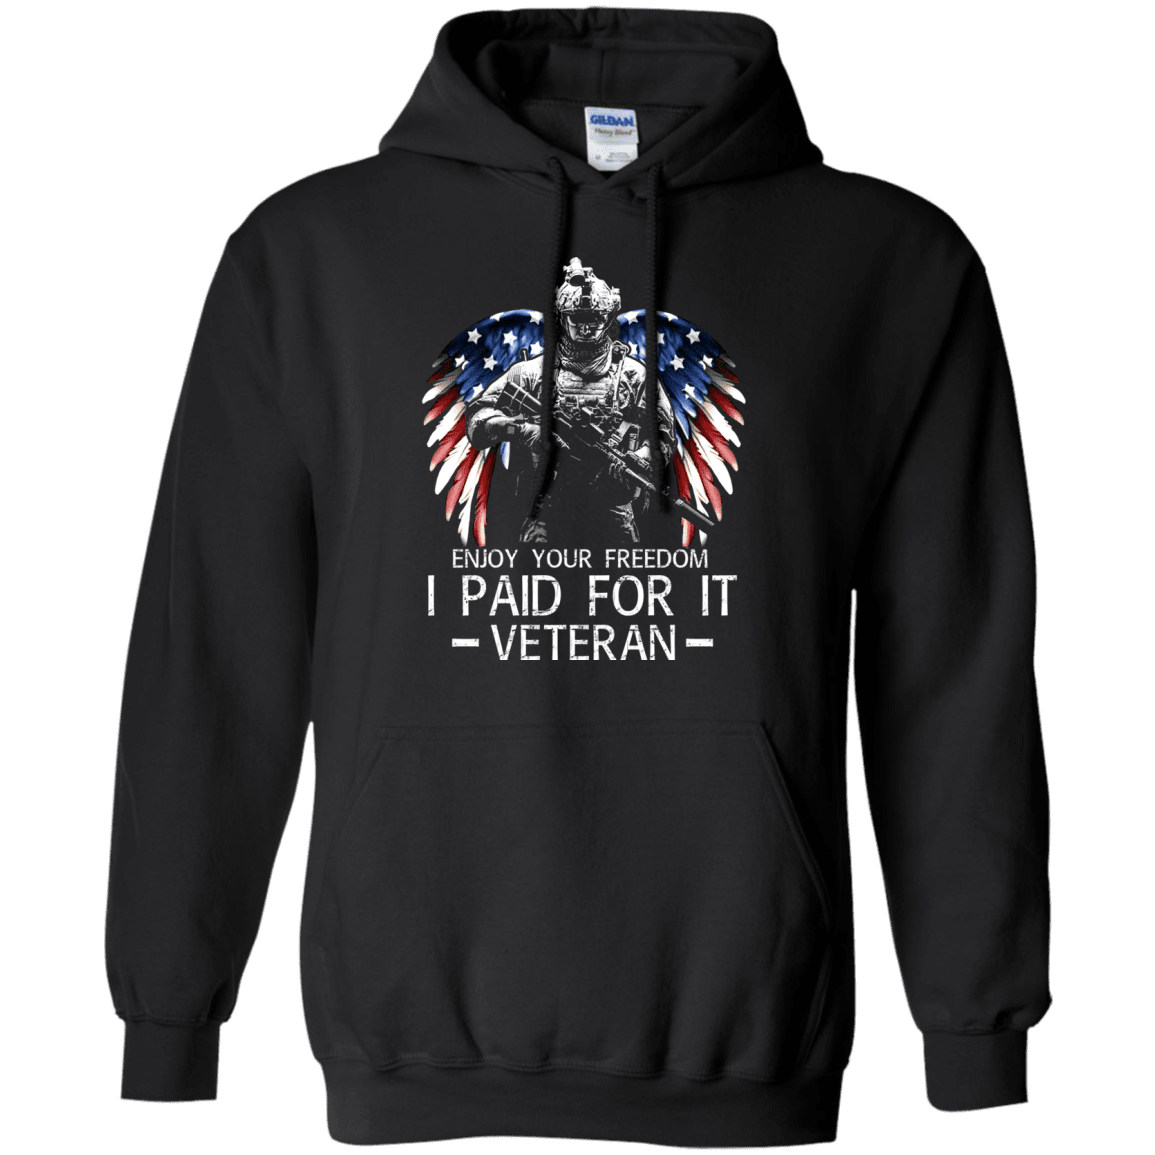 Military T-Shirt "Enjoy your freedom I paid for it Men" Front-TShirt-General-Veterans Nation